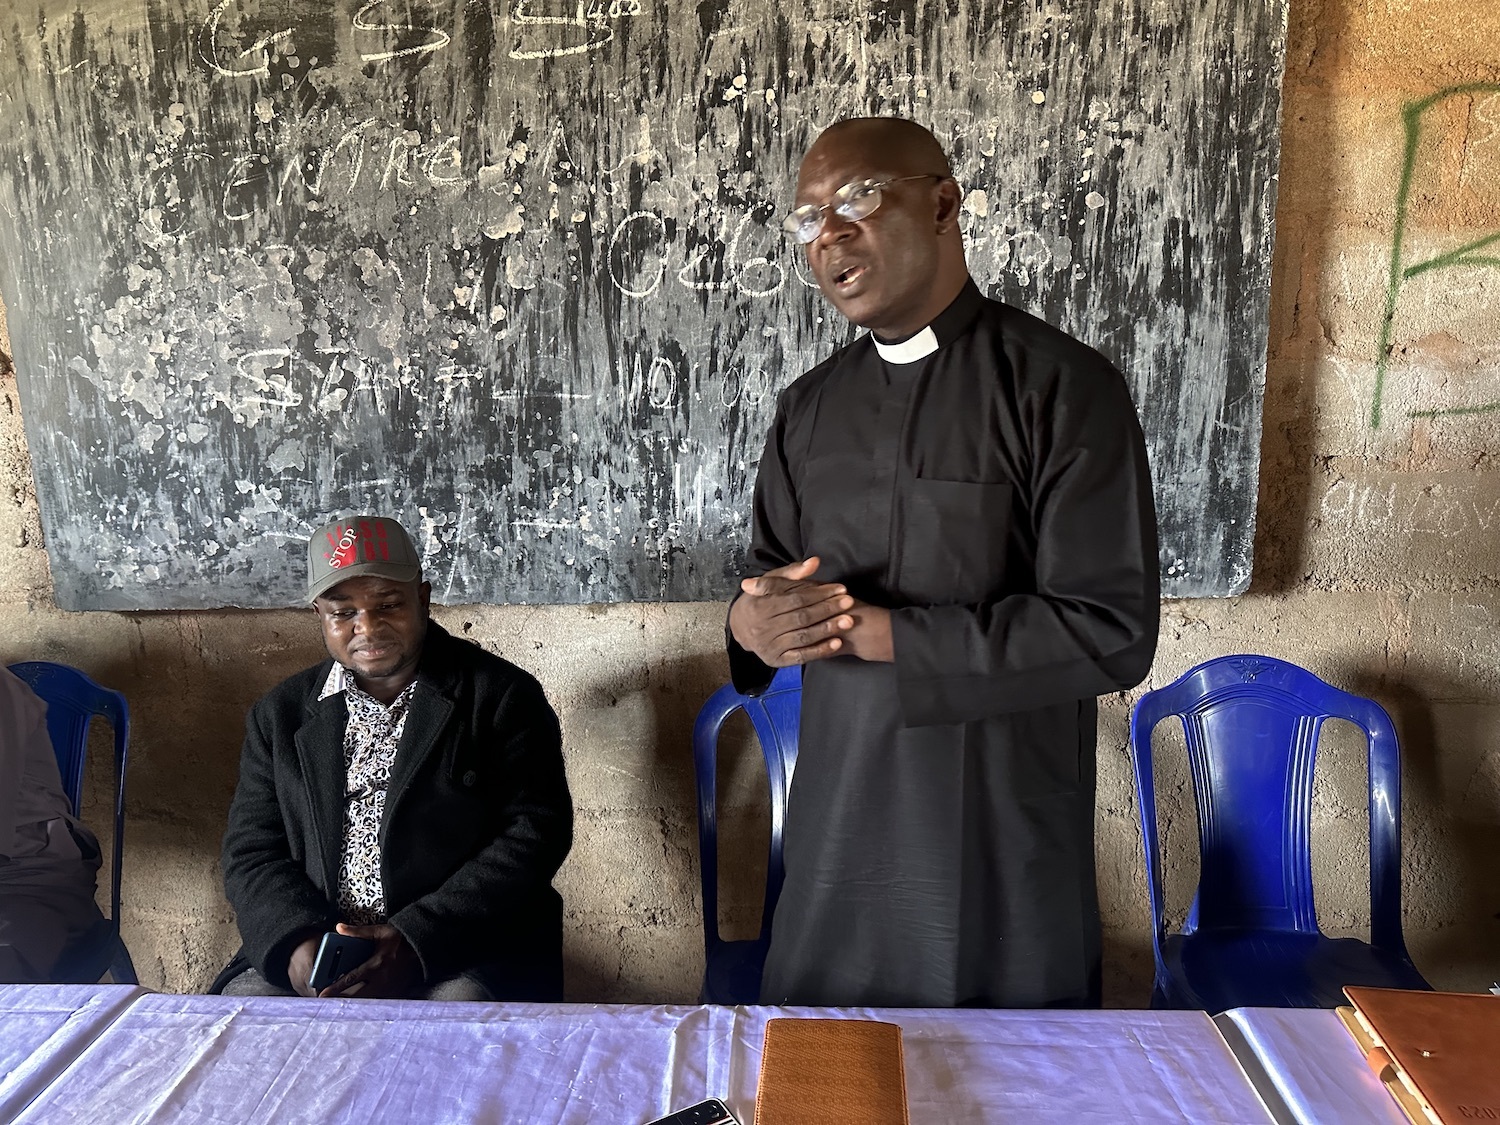 A priest is promoting interfaith dialogue for sustainable peace and social cohesion in Bukuru.